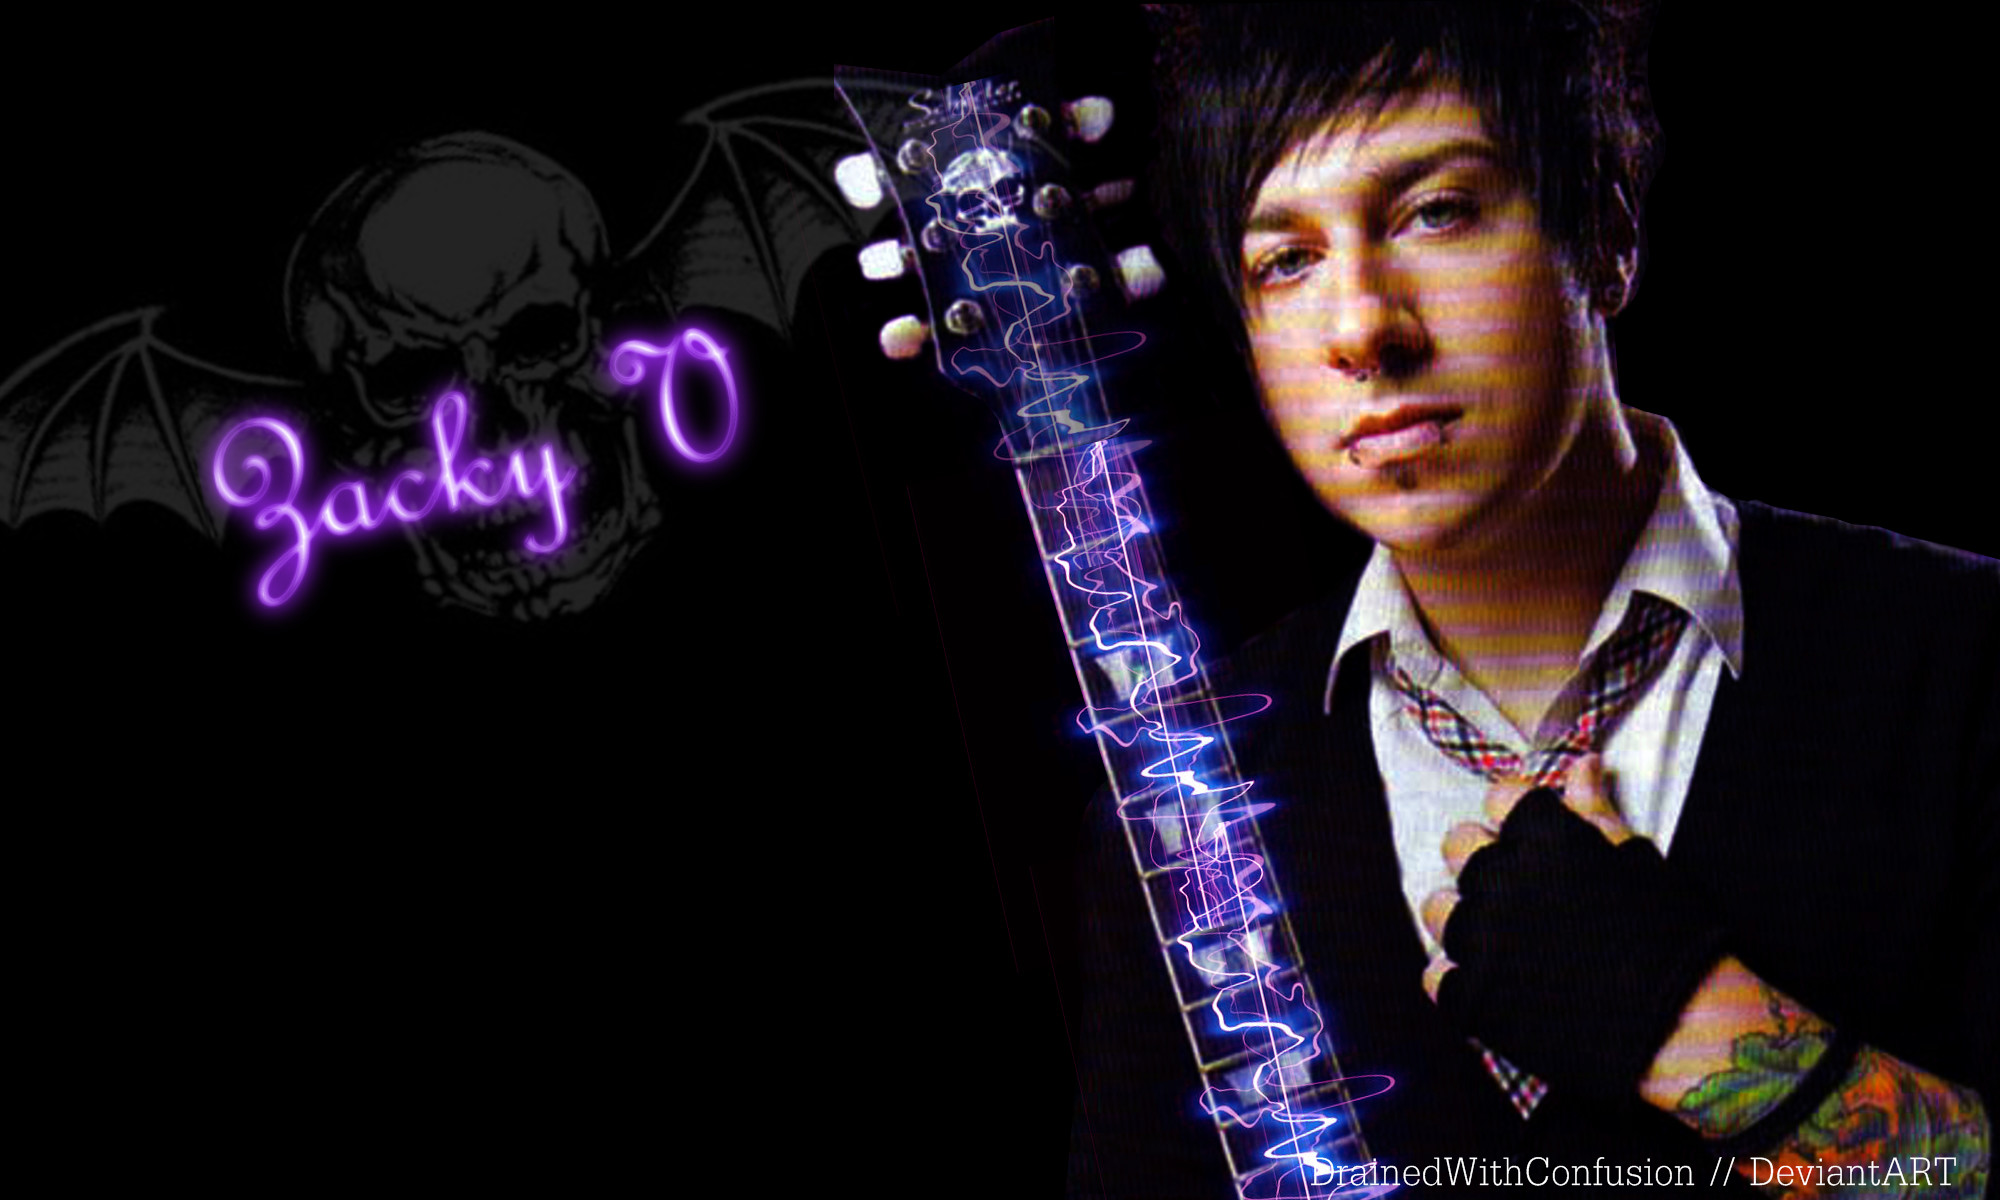 2000x1200 Zacky V Wallpaper 1 by DrainedWithConfusion Zacky V Wallpaper 1 by  DrainedWithConfusion